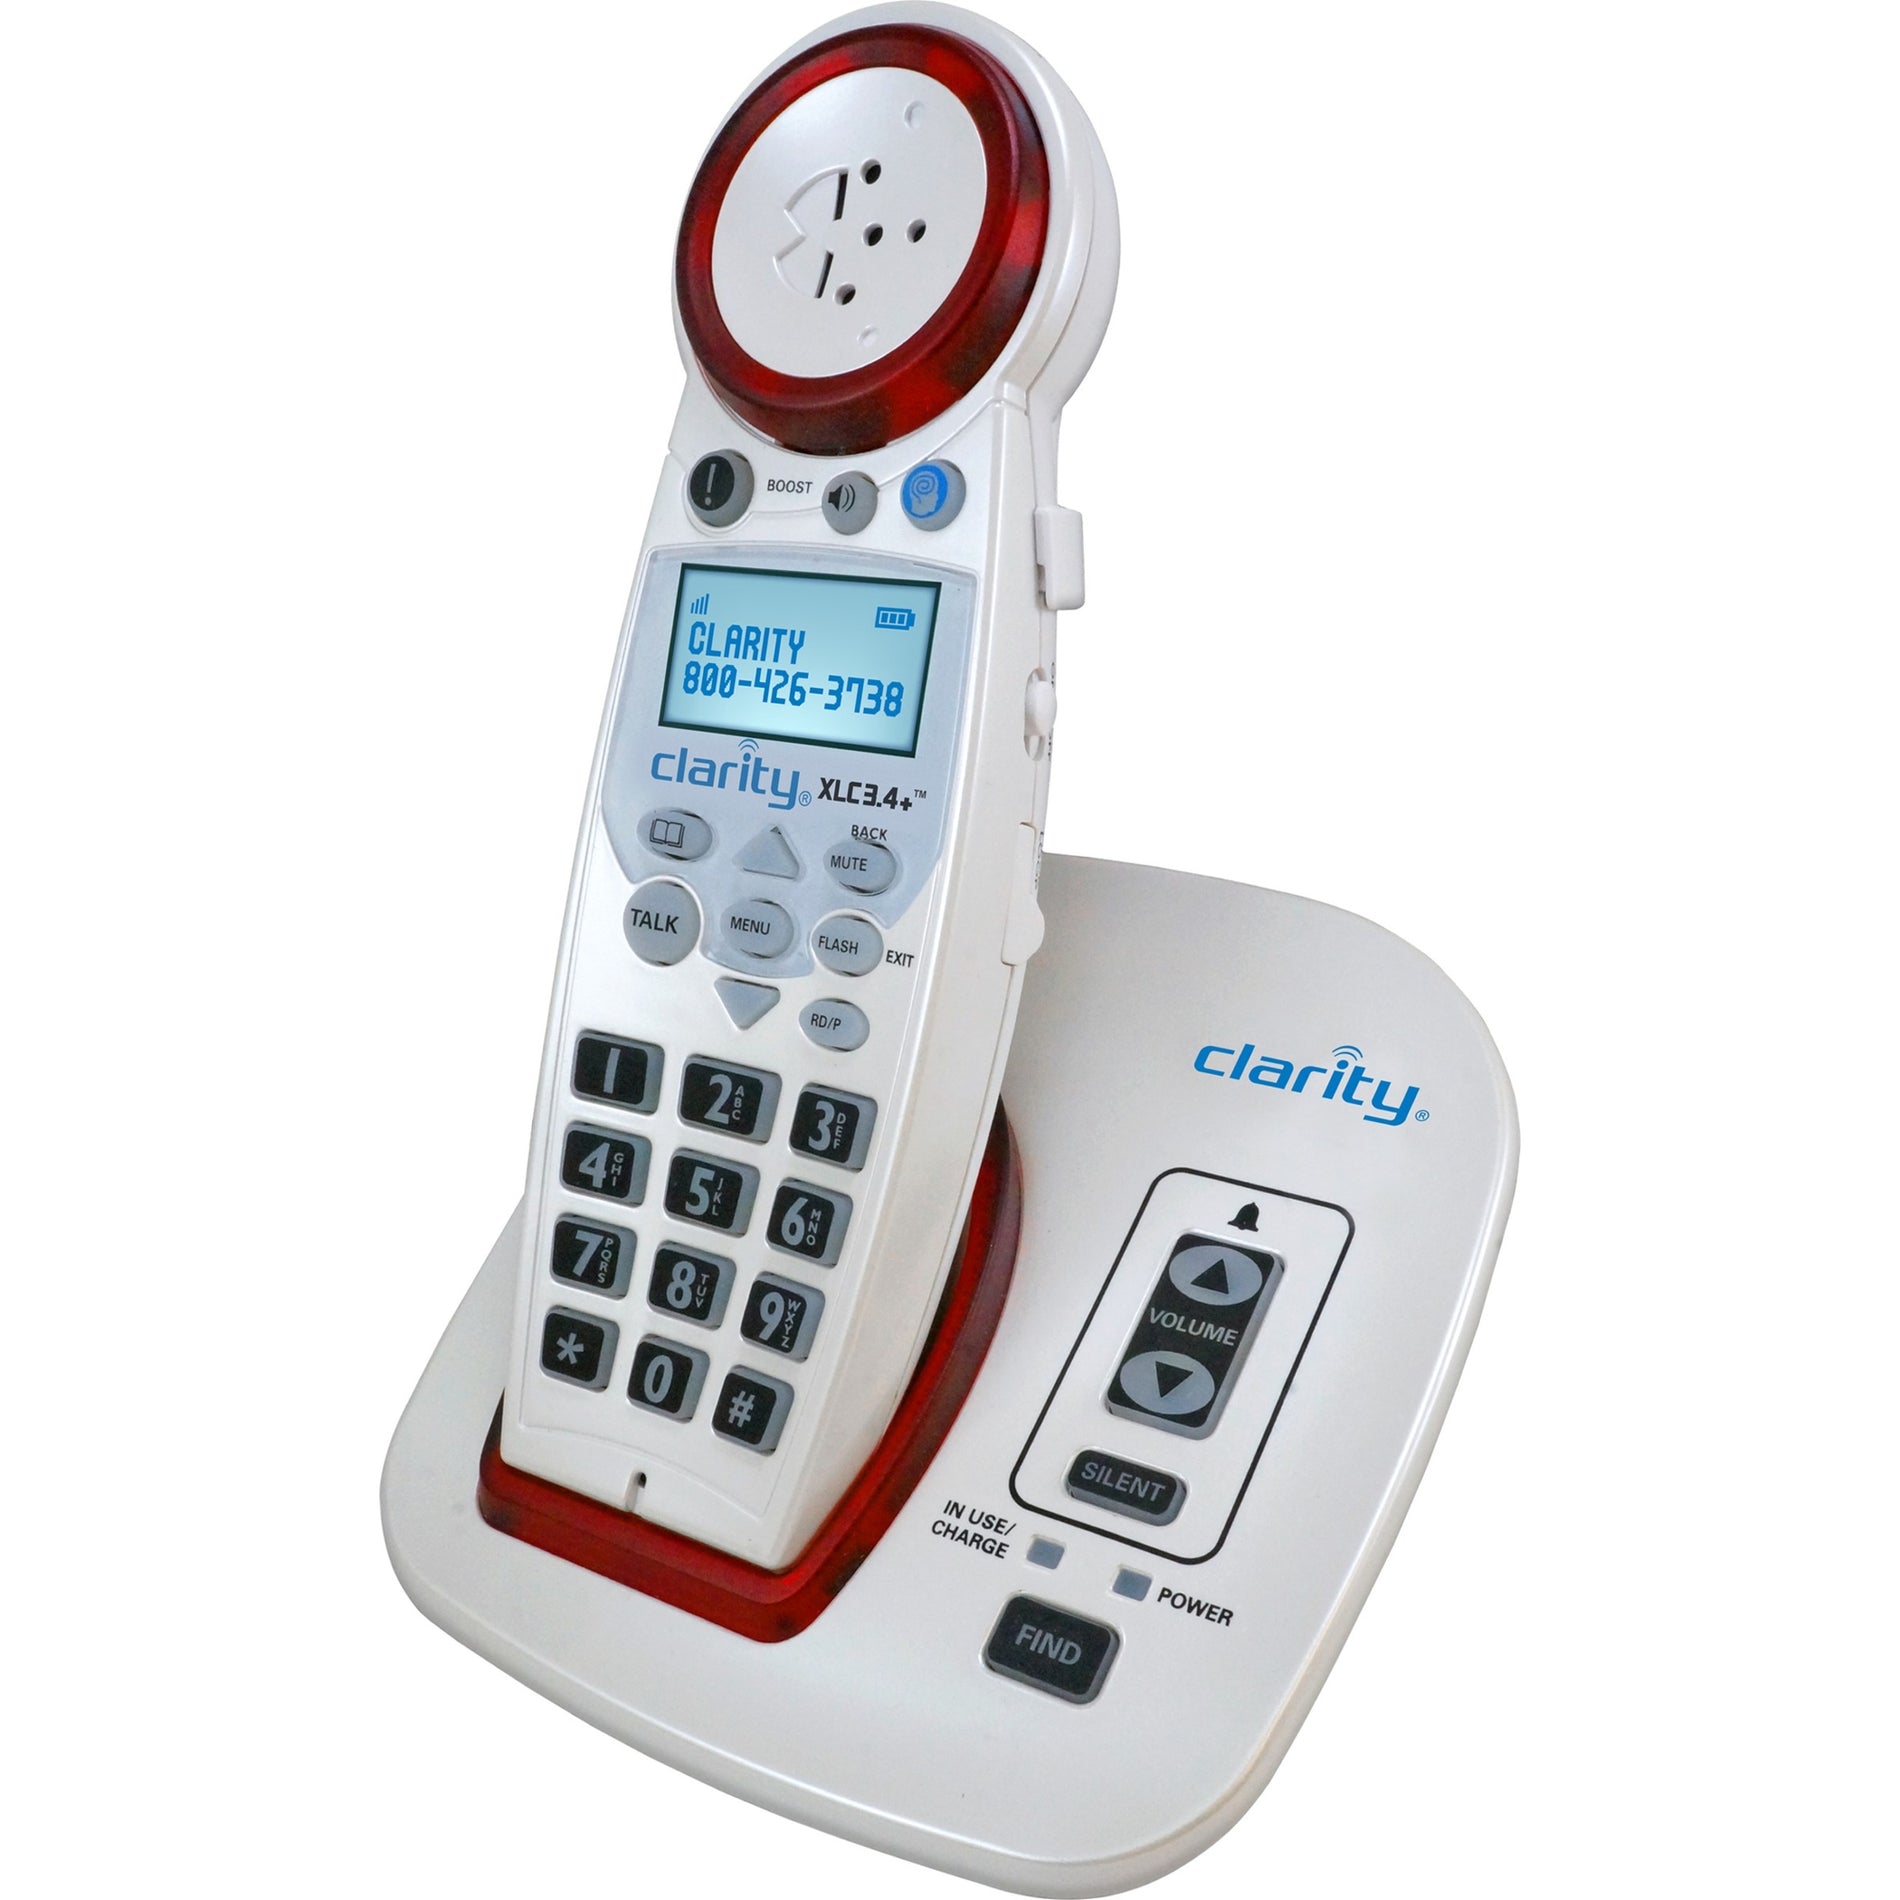 Clarity XLC3.4 Professional DECT Cordless Phone, Amplified Sound, Extra Loud Ringer, Hands-Free Mobility